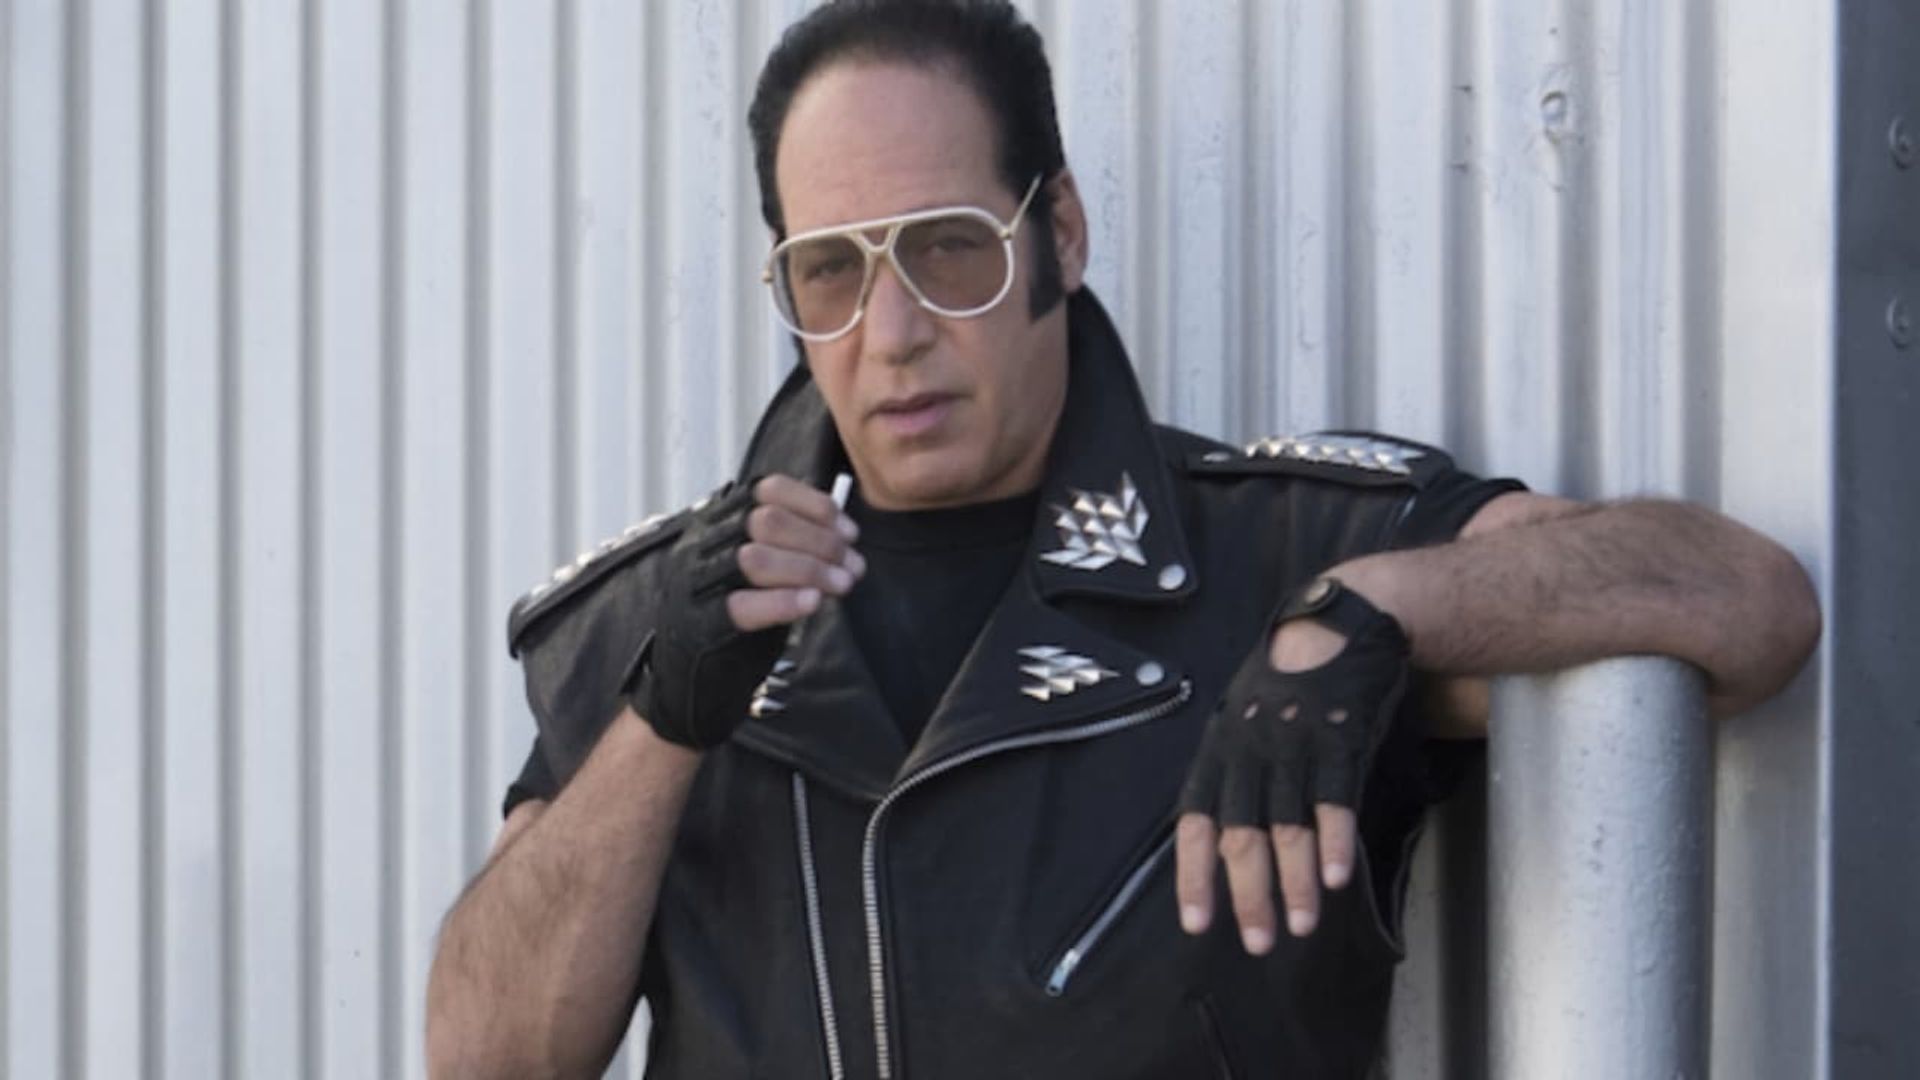 Andrew Dice Clay: I'm Over Here Now background